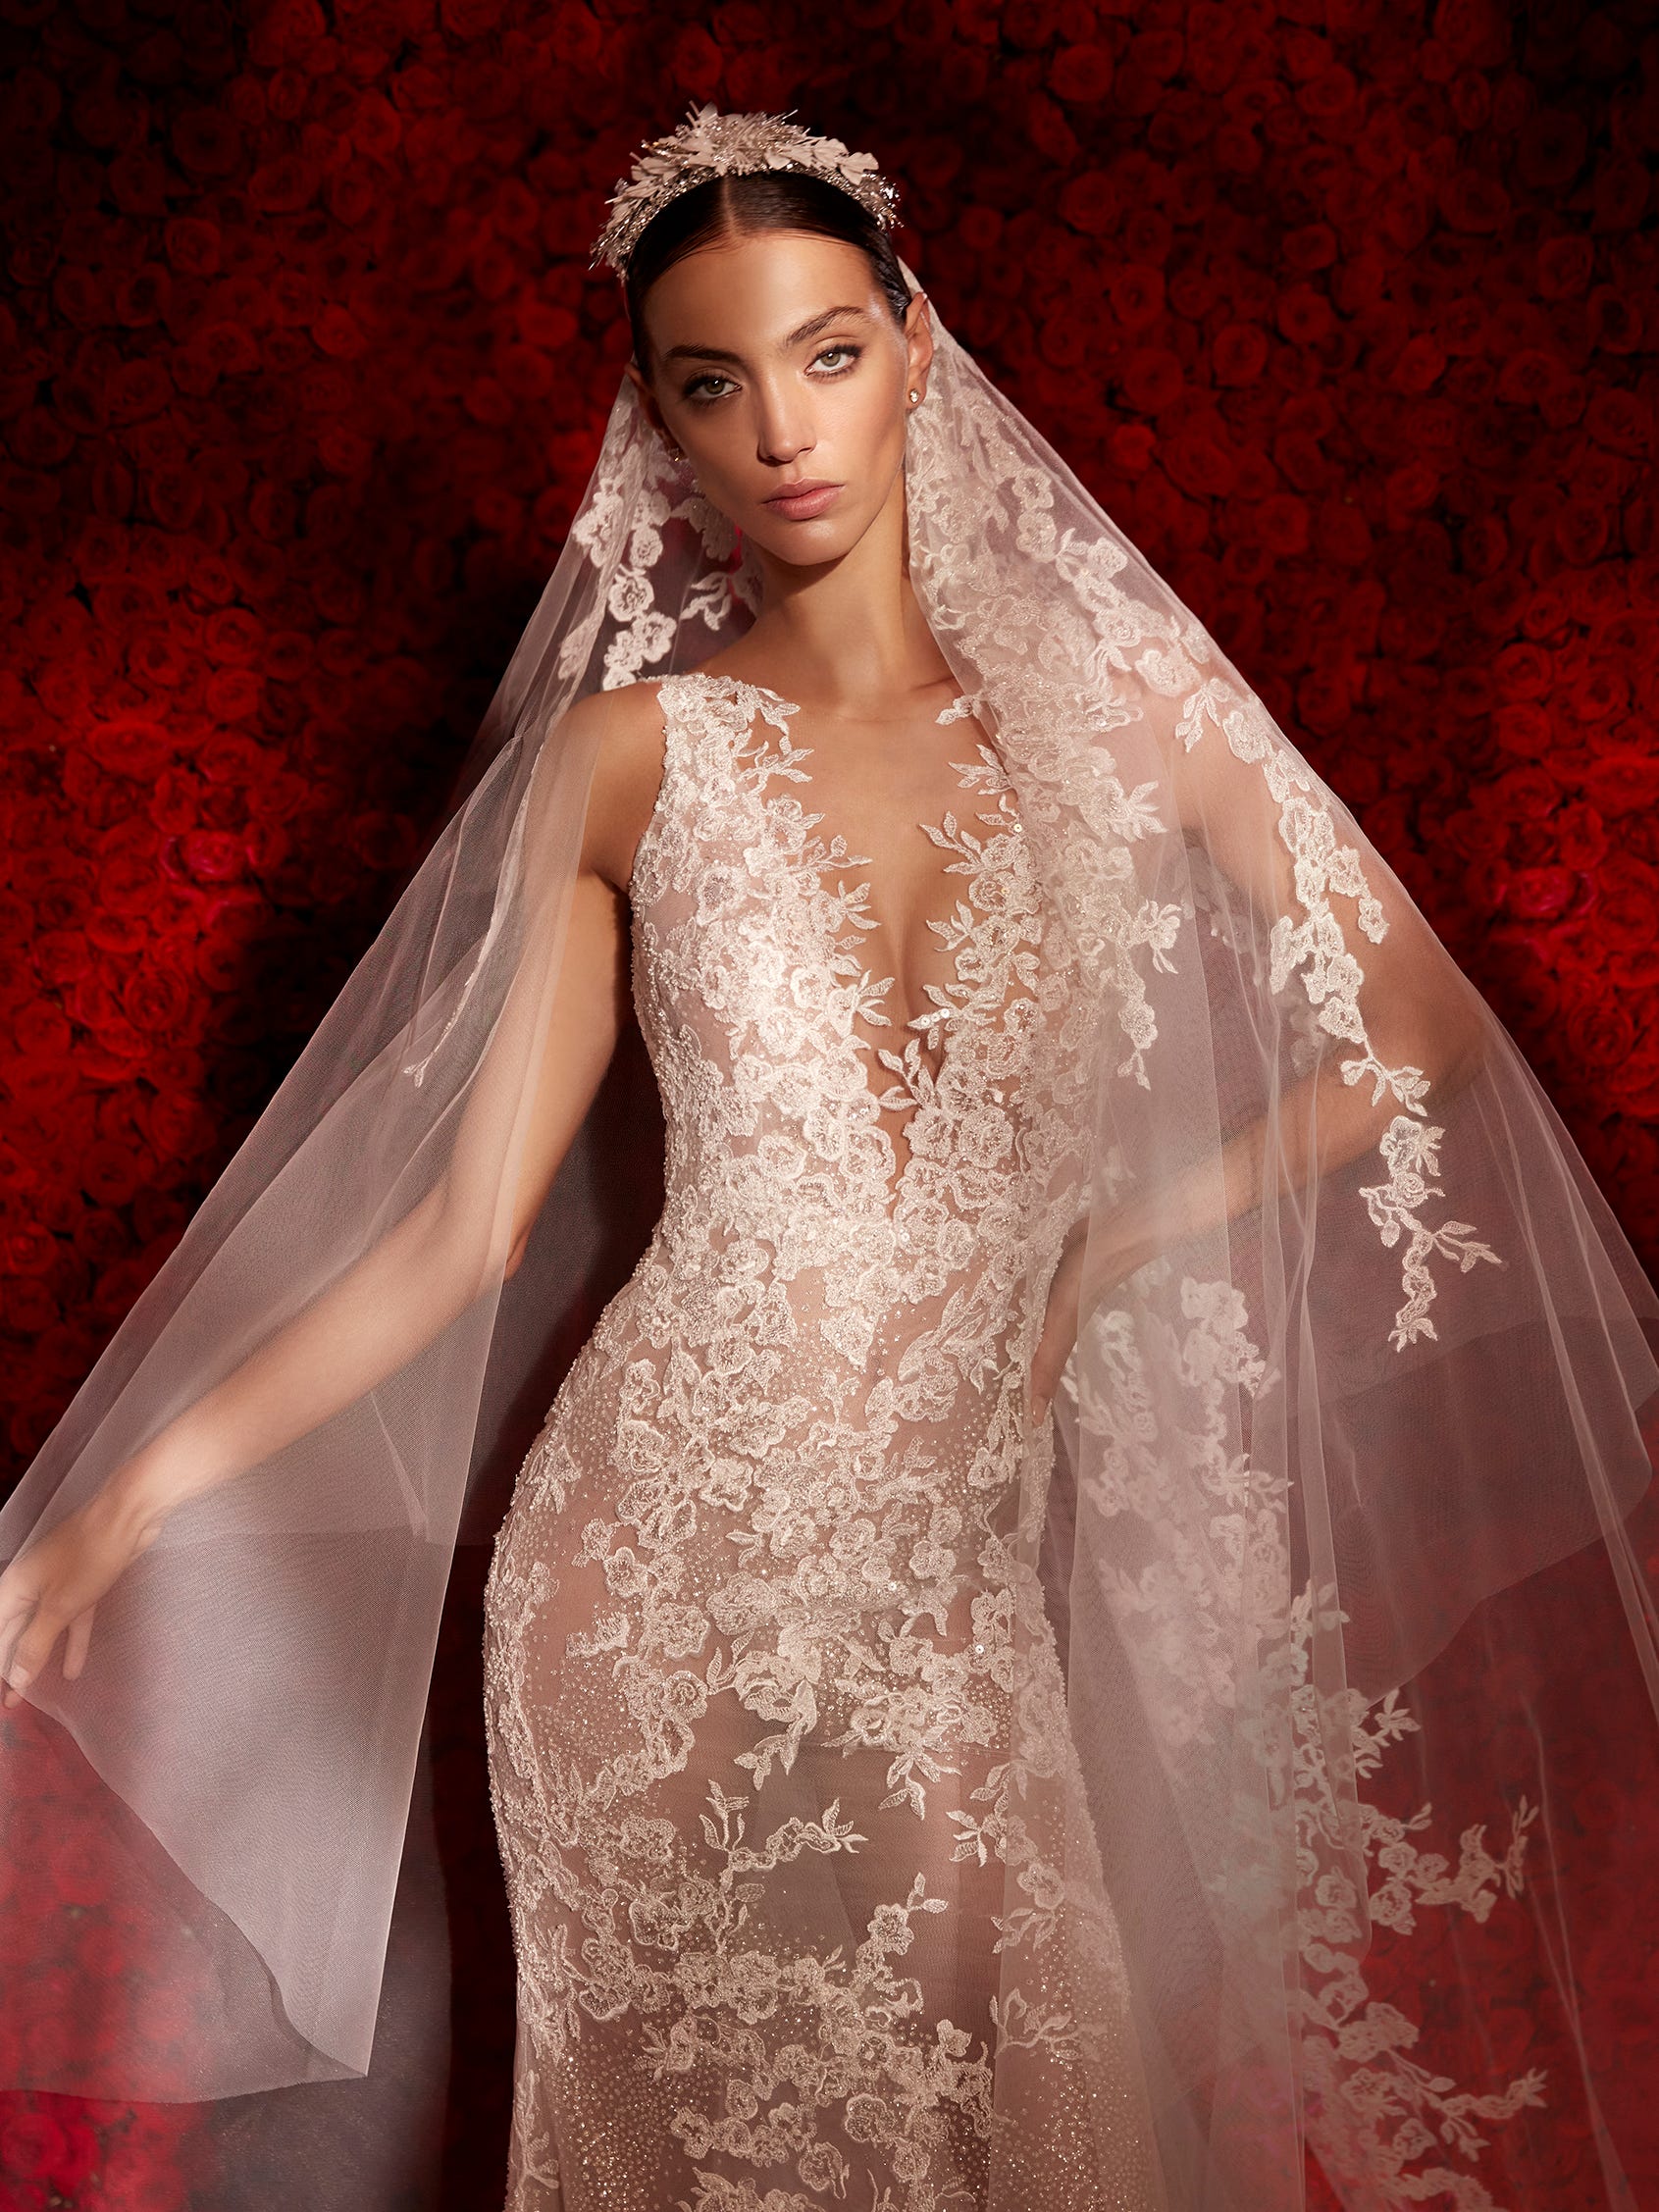 Bridal Veil: How to choose it? Which one to choose? Short Veil or Long Veil?